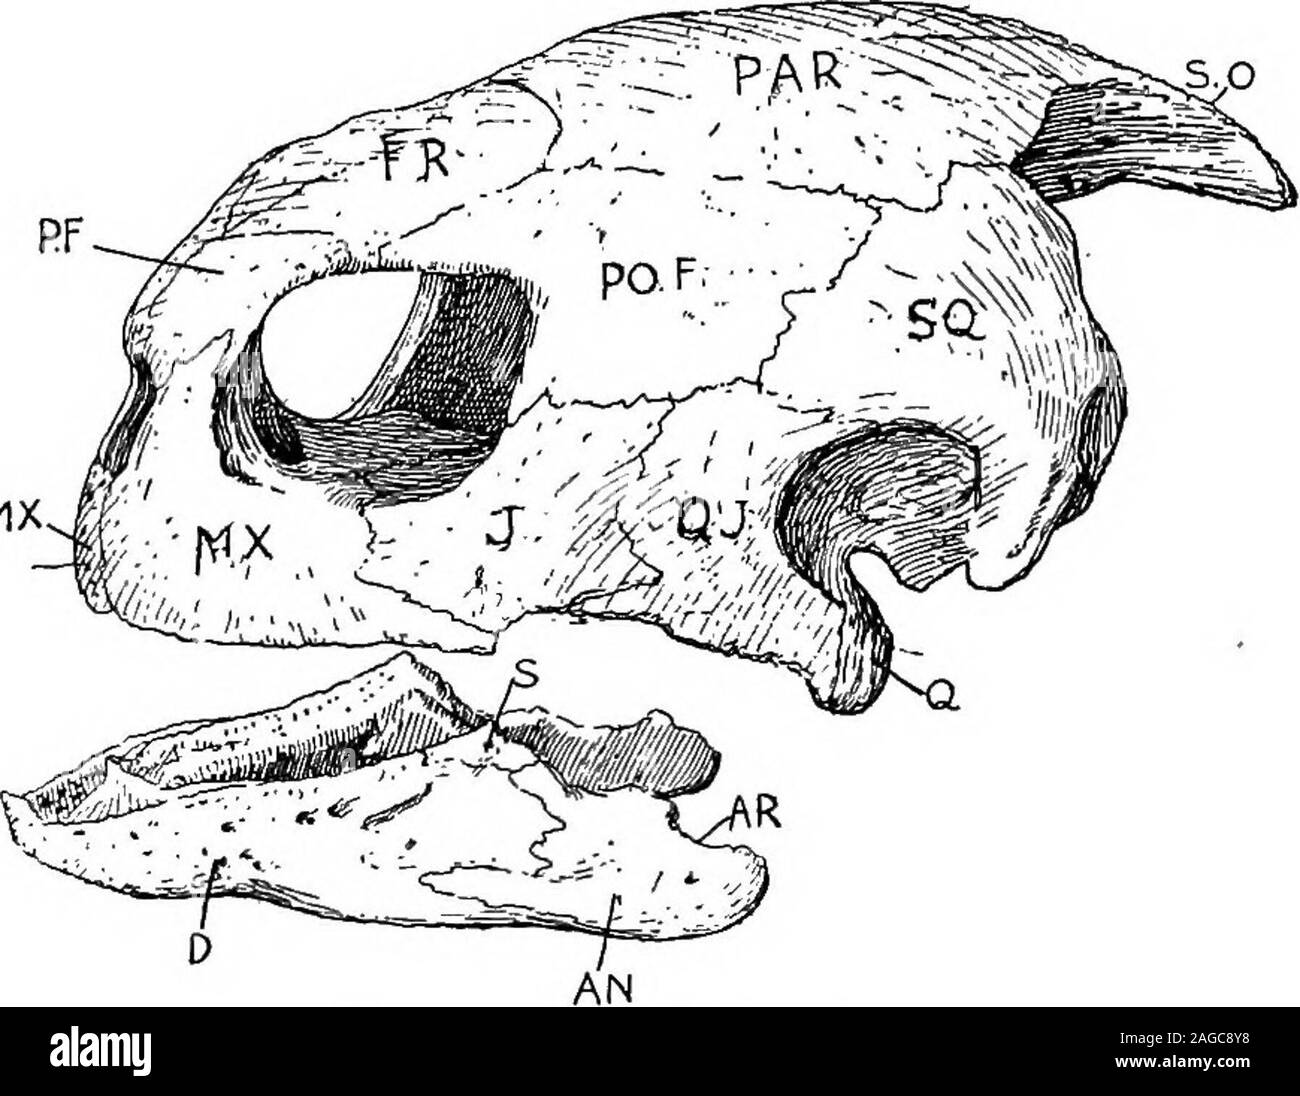 . Outlines of zoology. Fig. 329.—External appearance of tortoise. prix. Fig. 330.—Skull of turtle. S.O.^ supra-occipital;/^^., parietal; i?V?., frontal; P.F., pre-frontal; PO.F.y post-frontal; SQ.^ squamosal; PMX., pie-maxilla; MX., maxilla; /., jugal; Q.J., quadrato^ugal; Q.,quadrate; D,j dentary; AN,, angular; AR., articular; S.,surangular. shelter of which the head and neck, tail and limbs, can bemore or less retracted. The dorsal carapace is usually formed 6i4 REPTILIA. from—(a) the flattened neural spines {plus dermal scutes);(b) expanded and more or less coalesced ribs {plus costaldermal Stock Photo